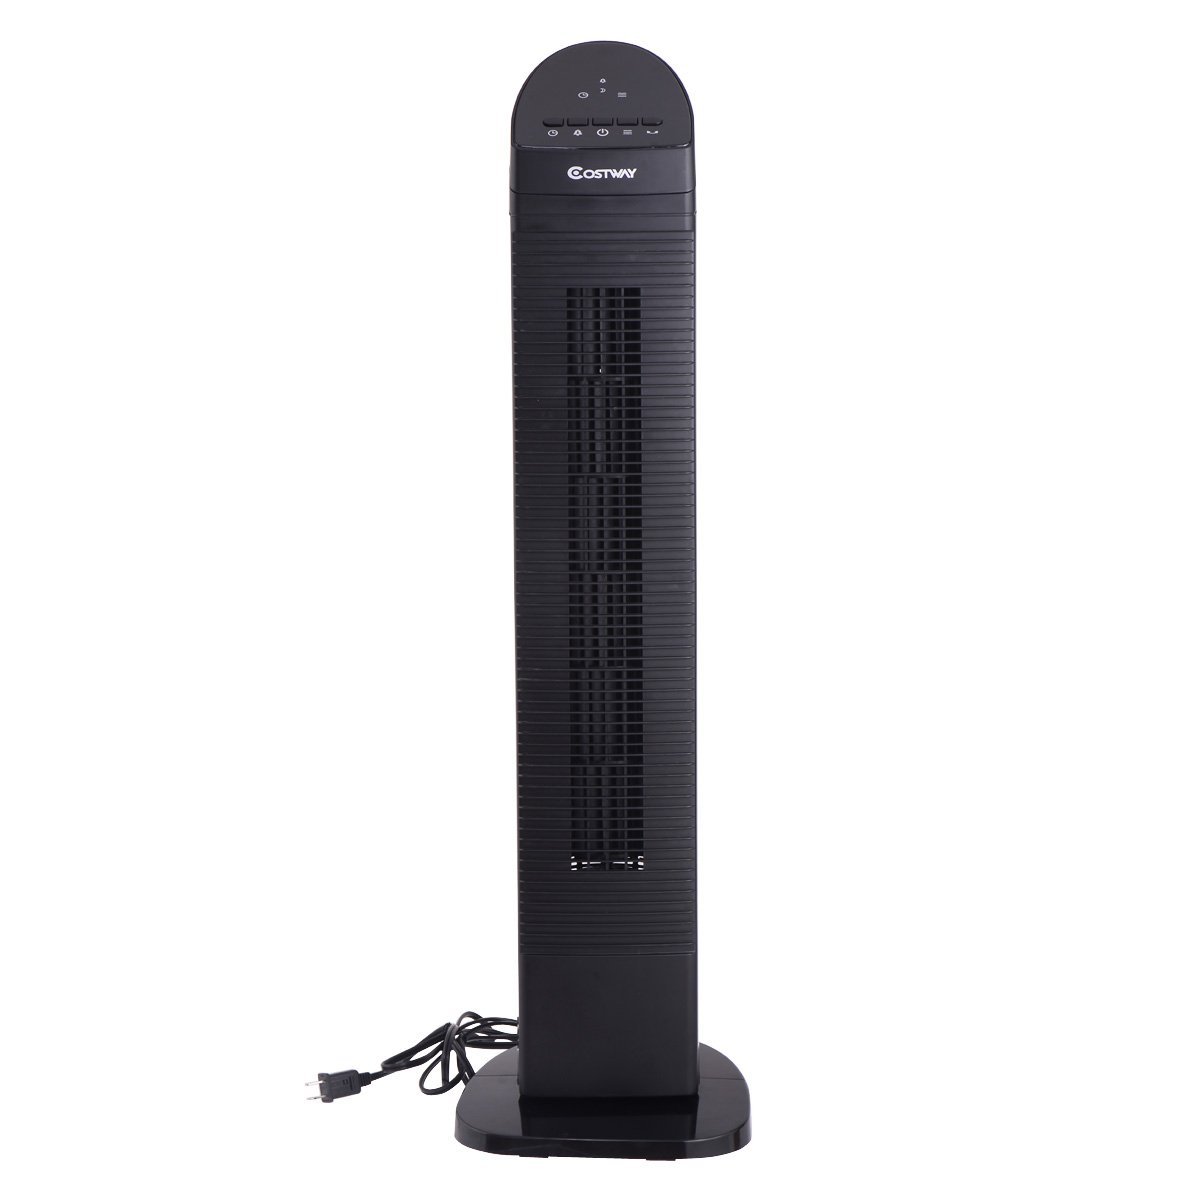 Costway 35″ Tower Fan Portable Oscillating Cooling Fan 3 Speed /w Remote Control – Just $39.99!